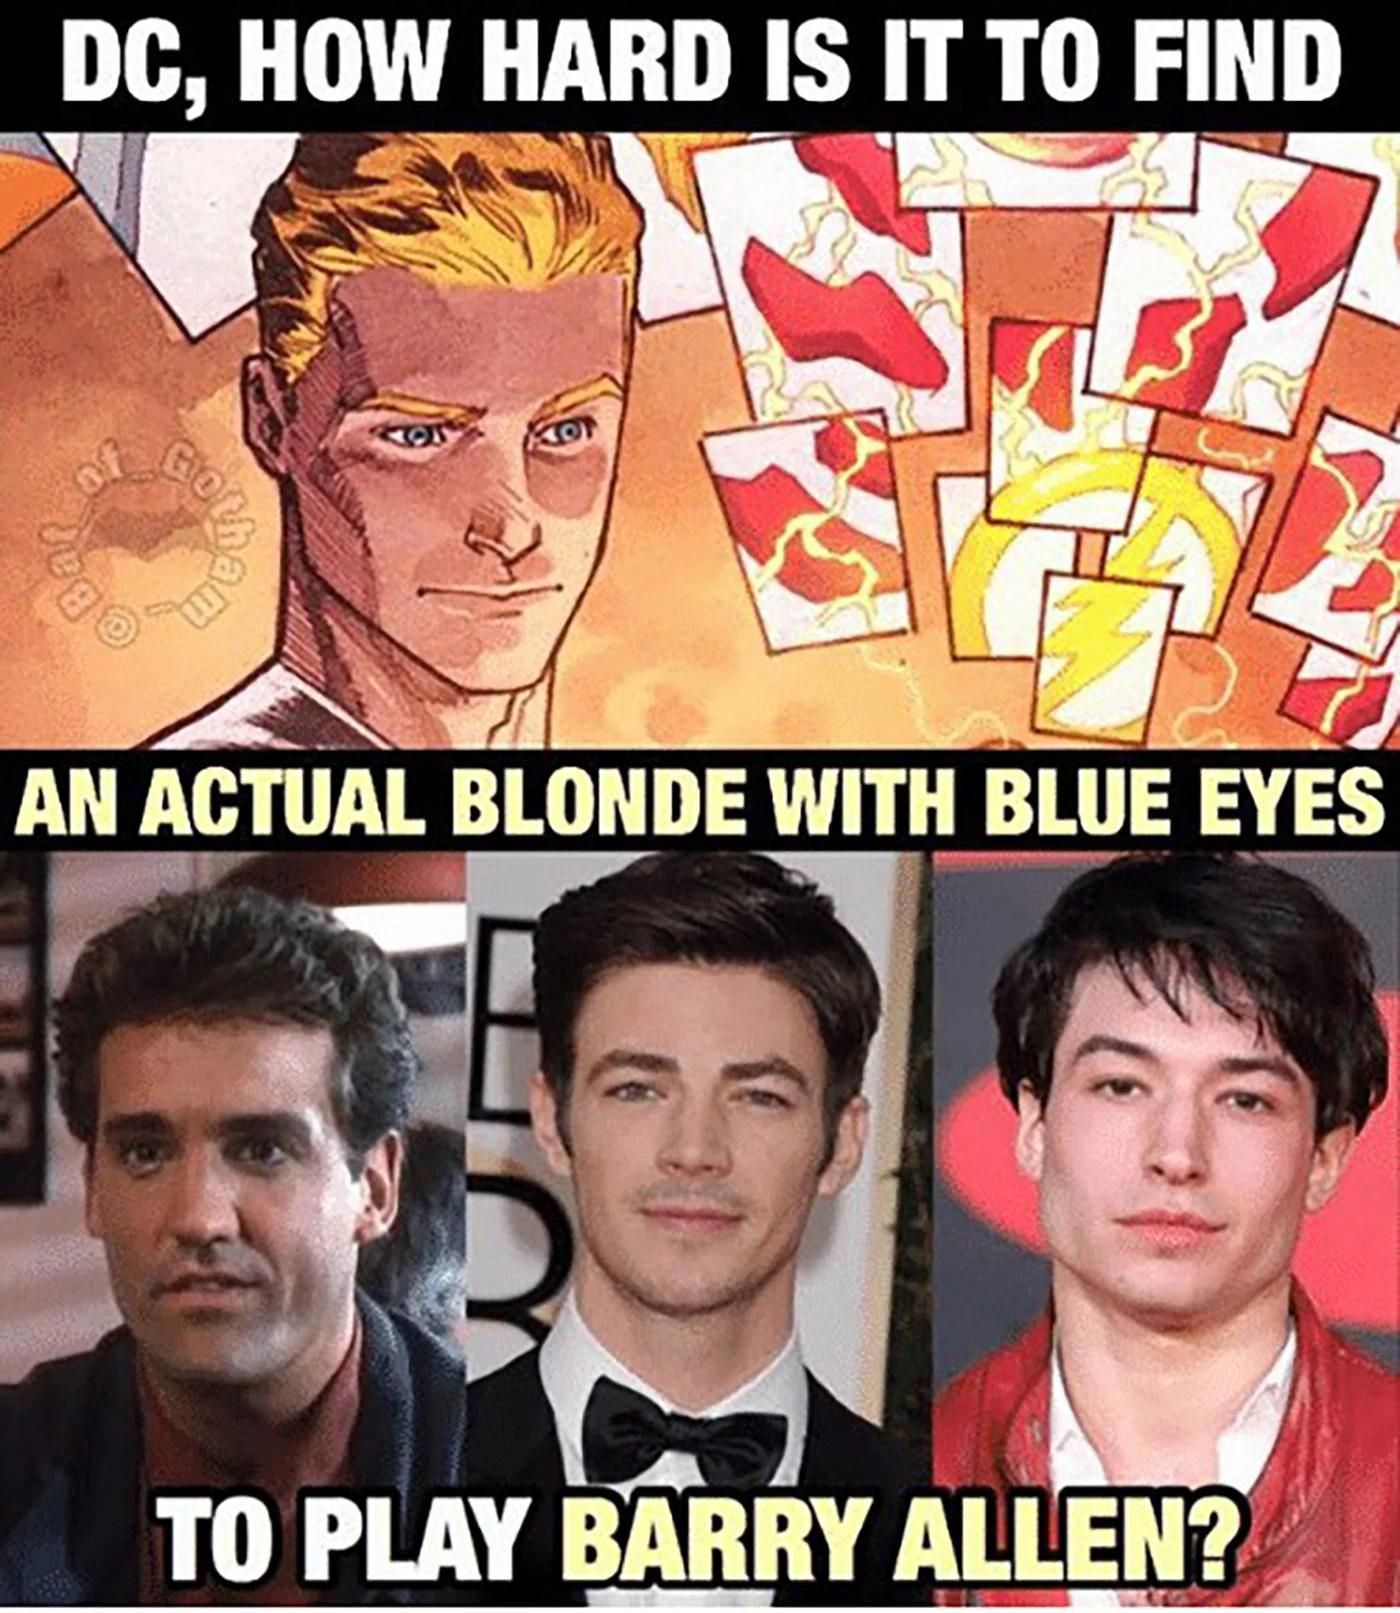 Meme featuring The Flash actors and Barry Allen from comics